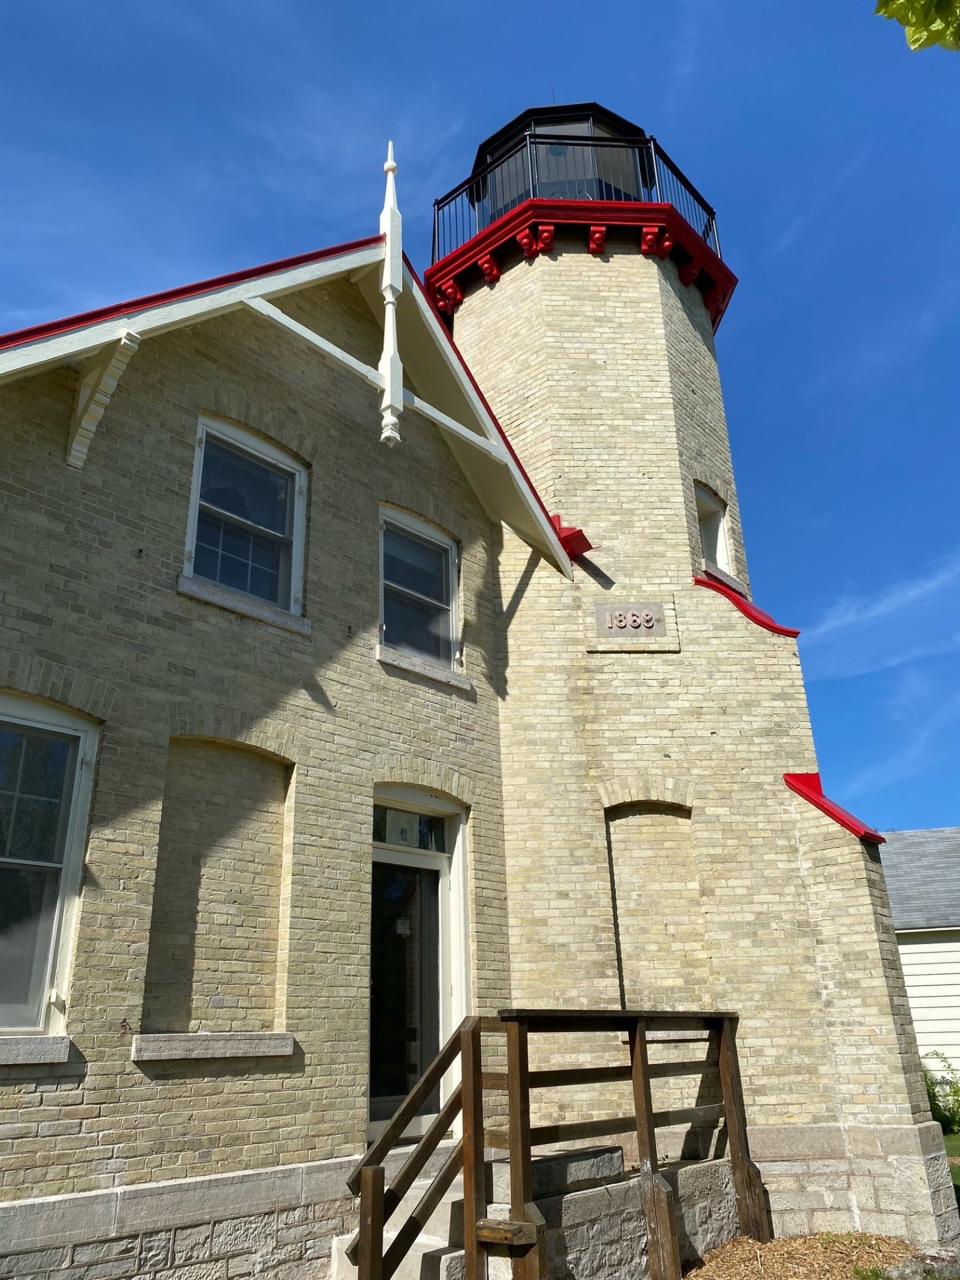 This photo shows restoration done on the brick and numbered placard at the McGulpin Point Lighthouse in Mackinaw City.